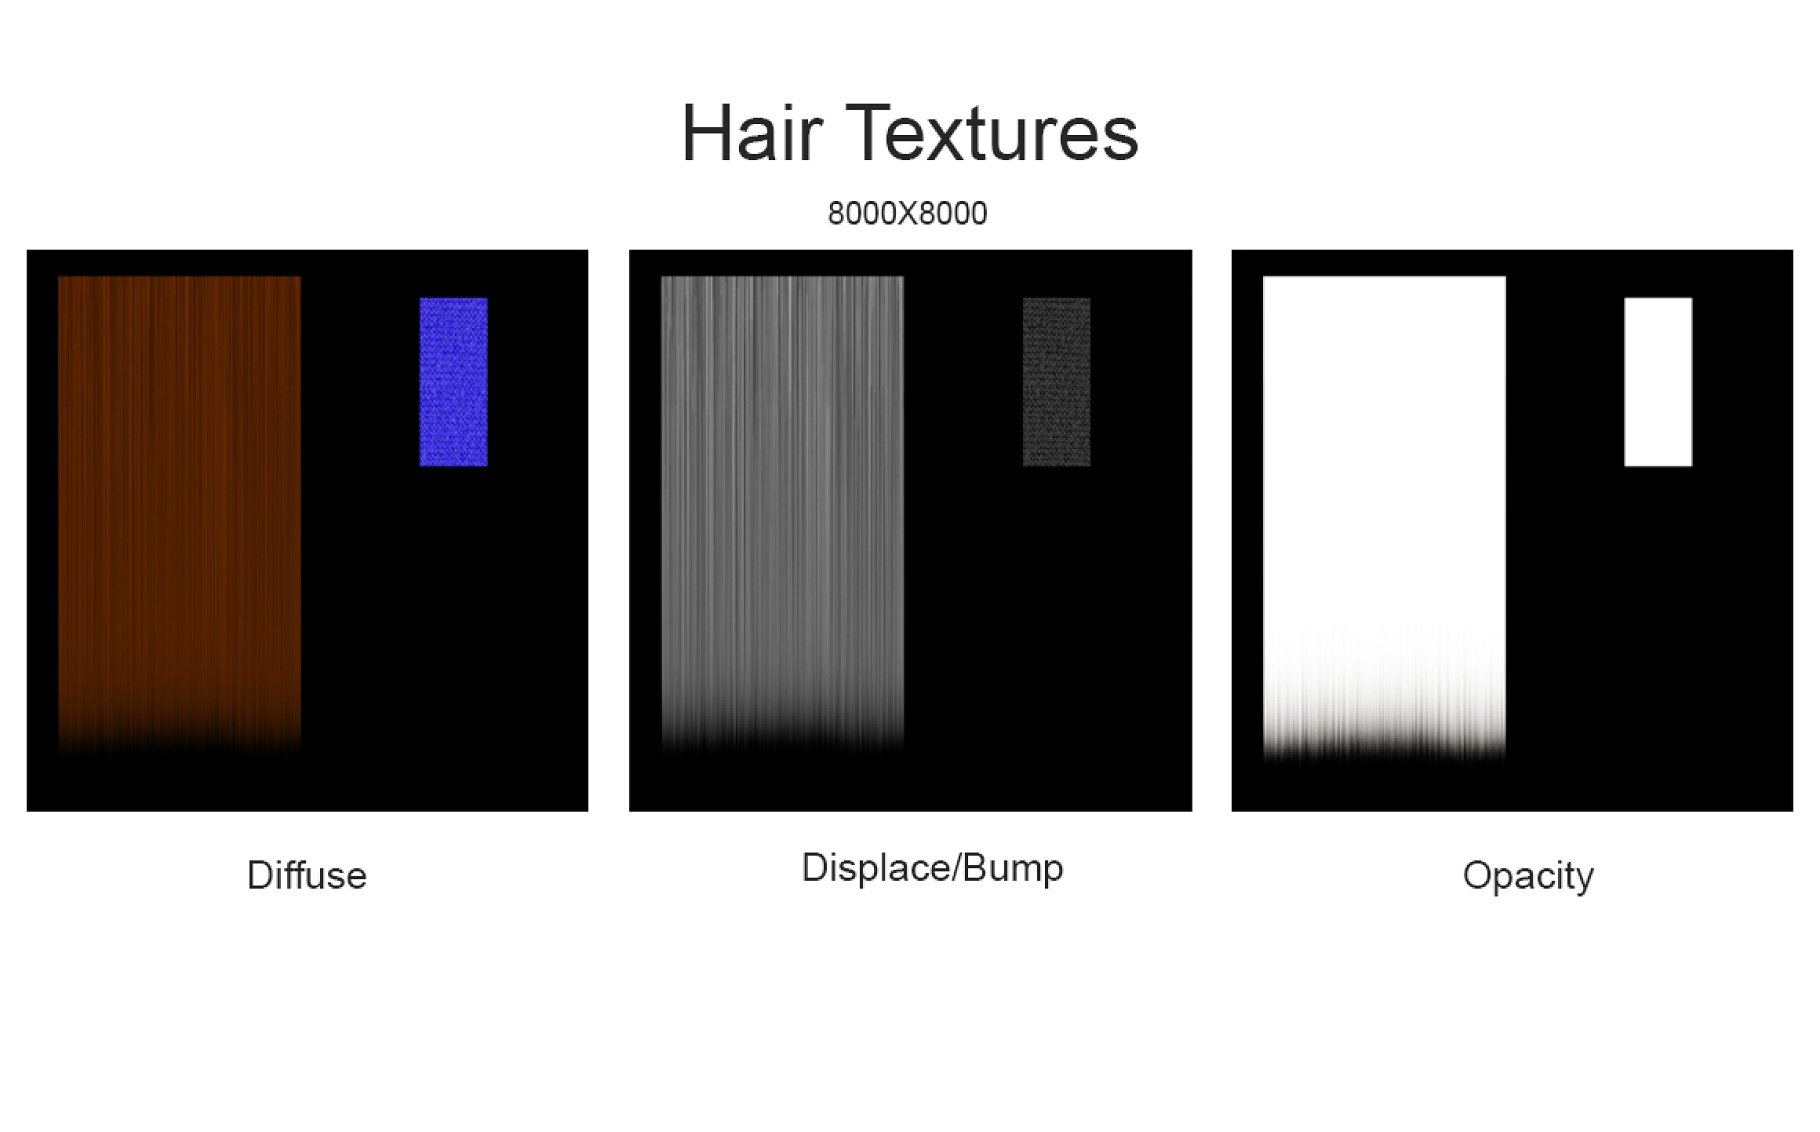 Diffuse, displace/bump and opacity hair textures.